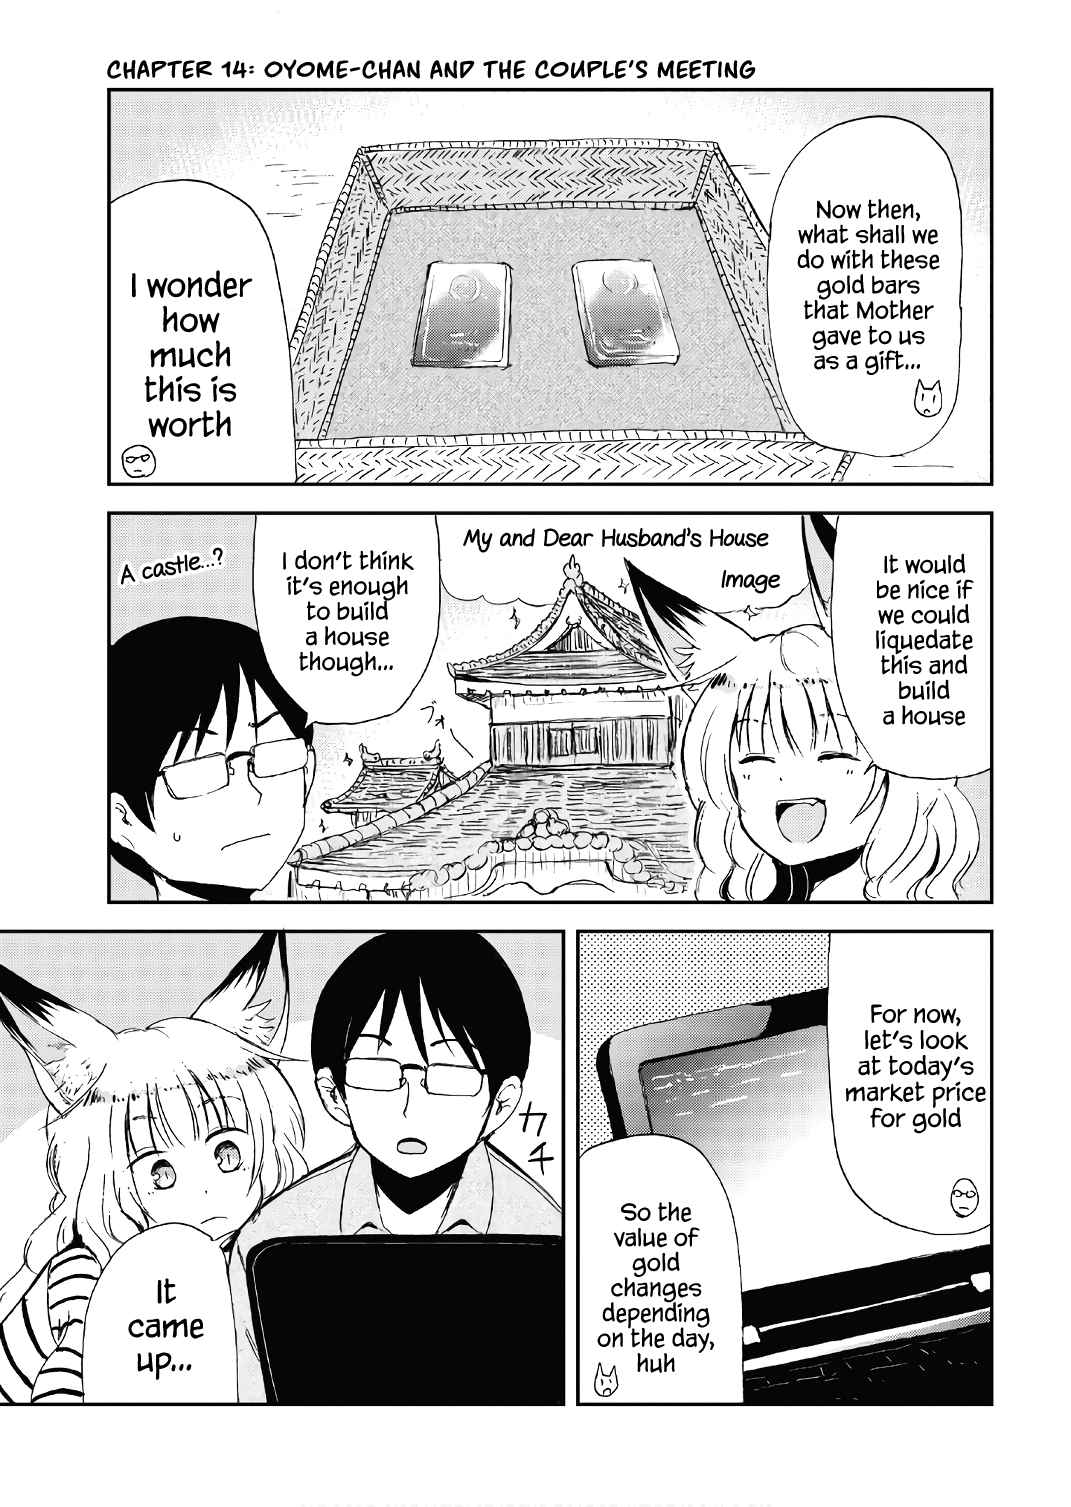 Kitsune no Oyome chan Vol. 2 Ch. 14 Oyome chan and the Couple's Meeting